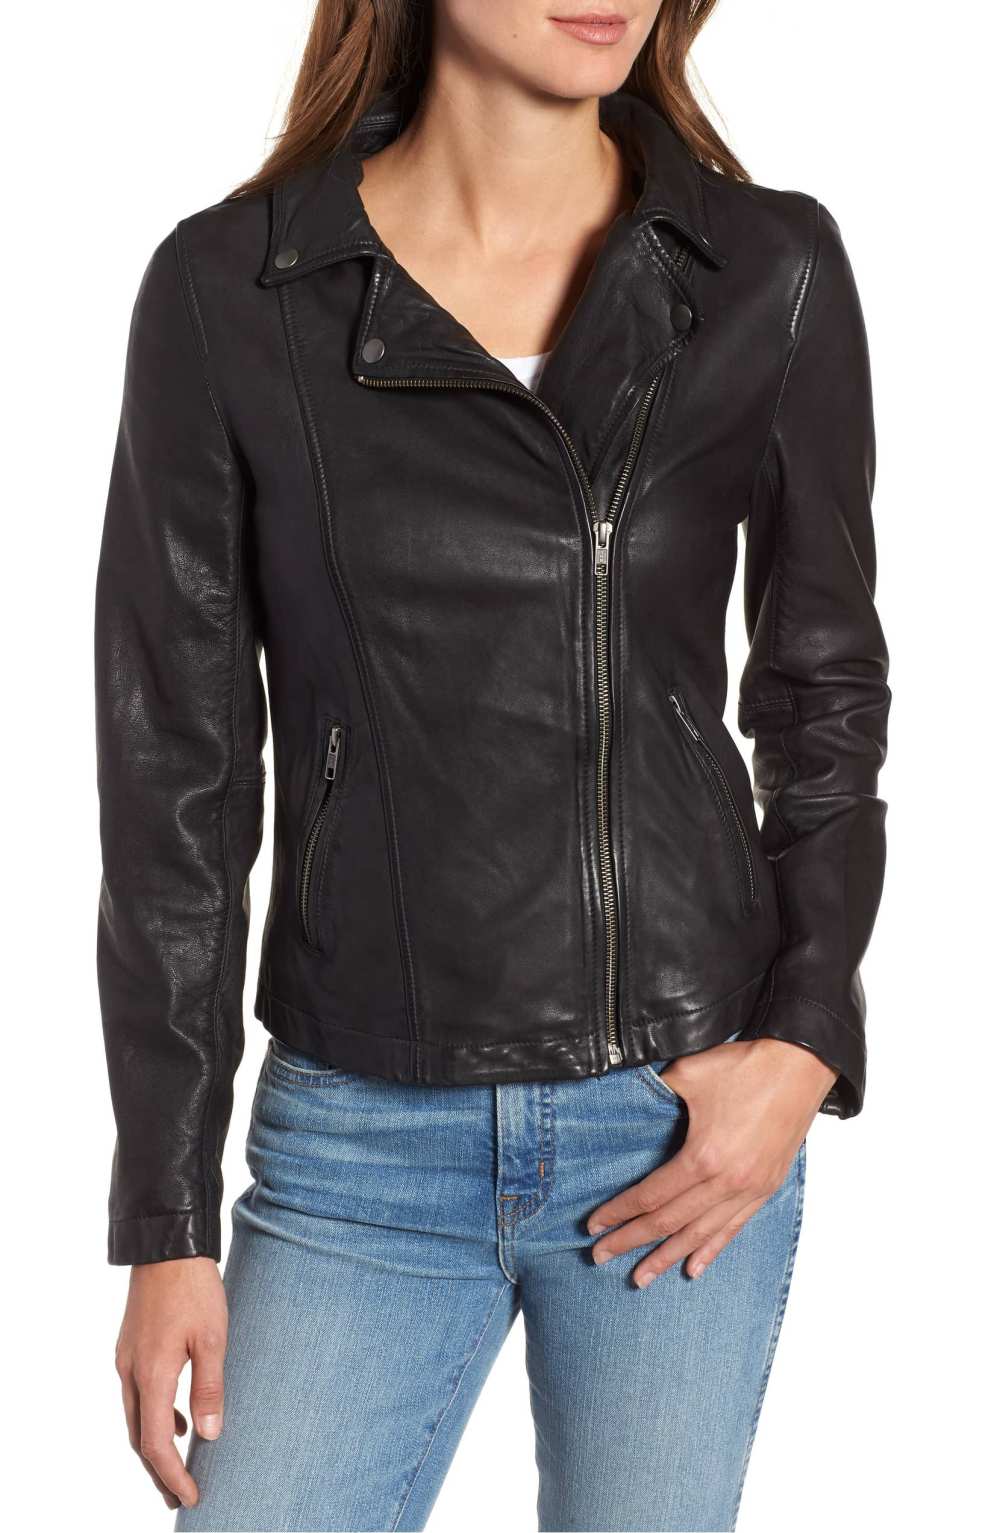 caslon leather jacket with hood inset removed